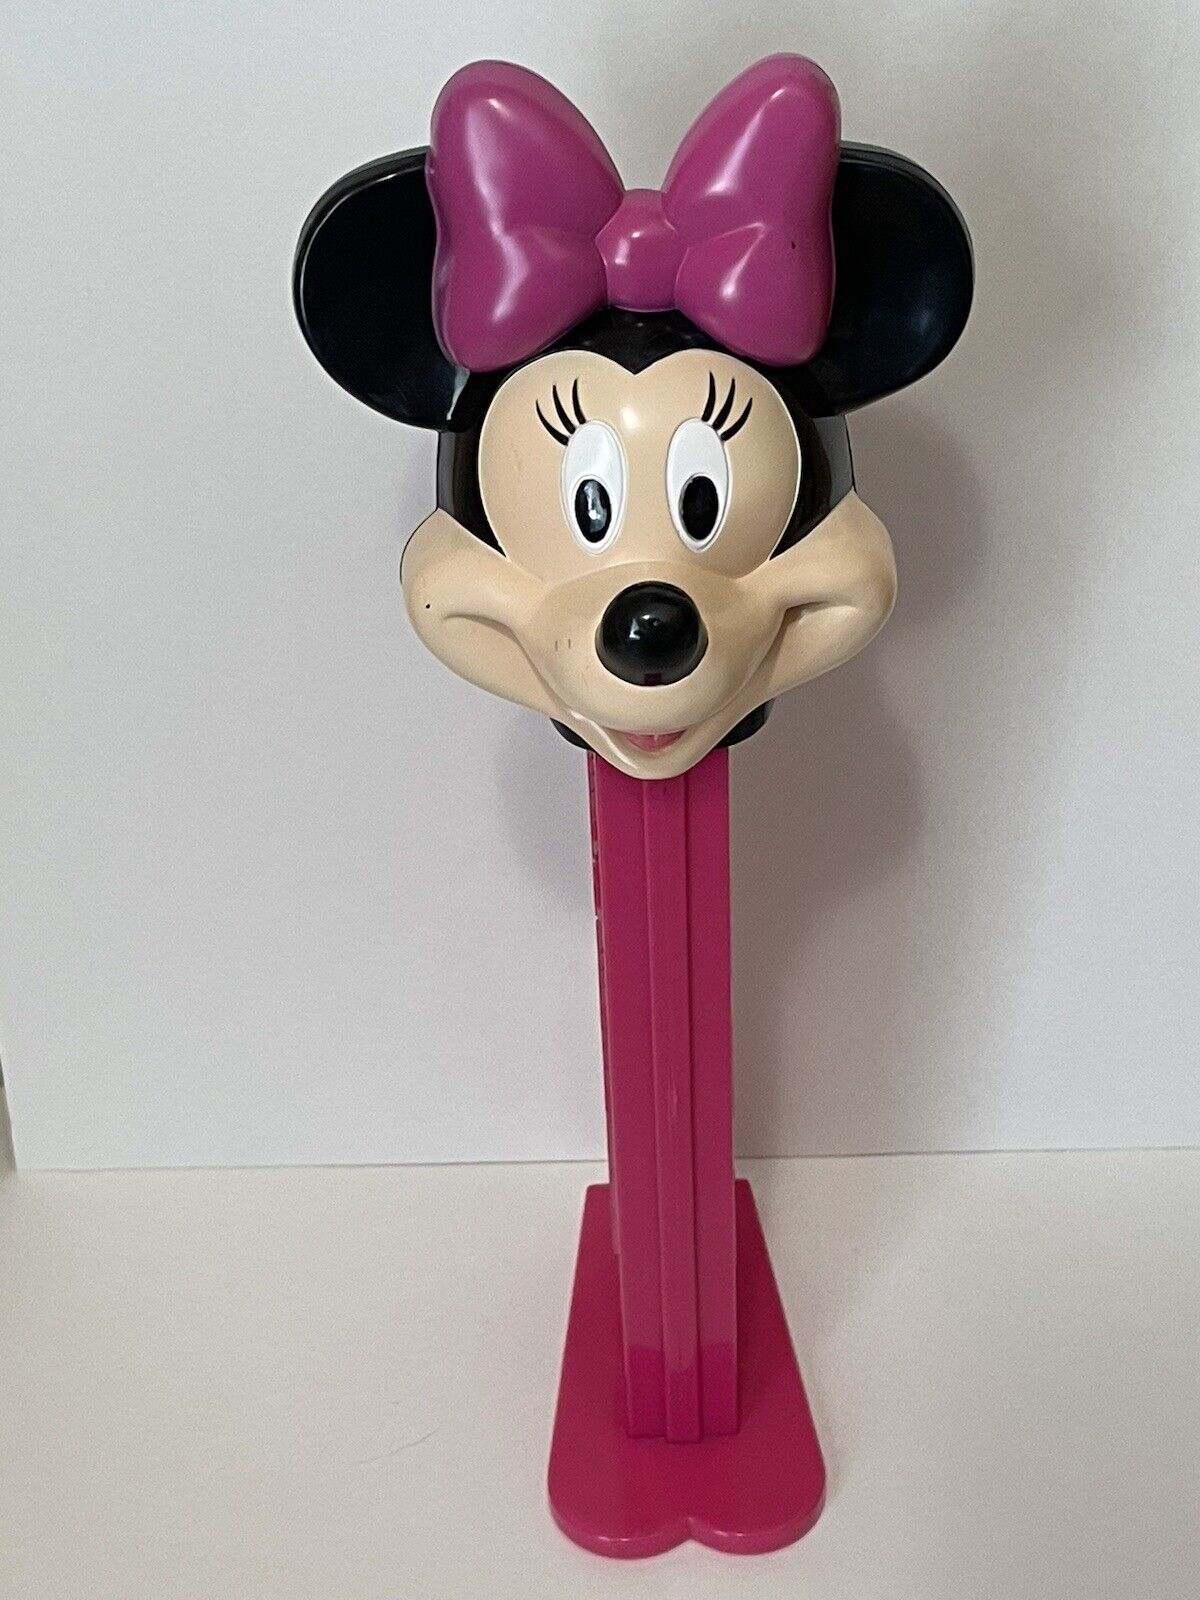 Giant PEZ Minnie Mouse Candy Dispensers